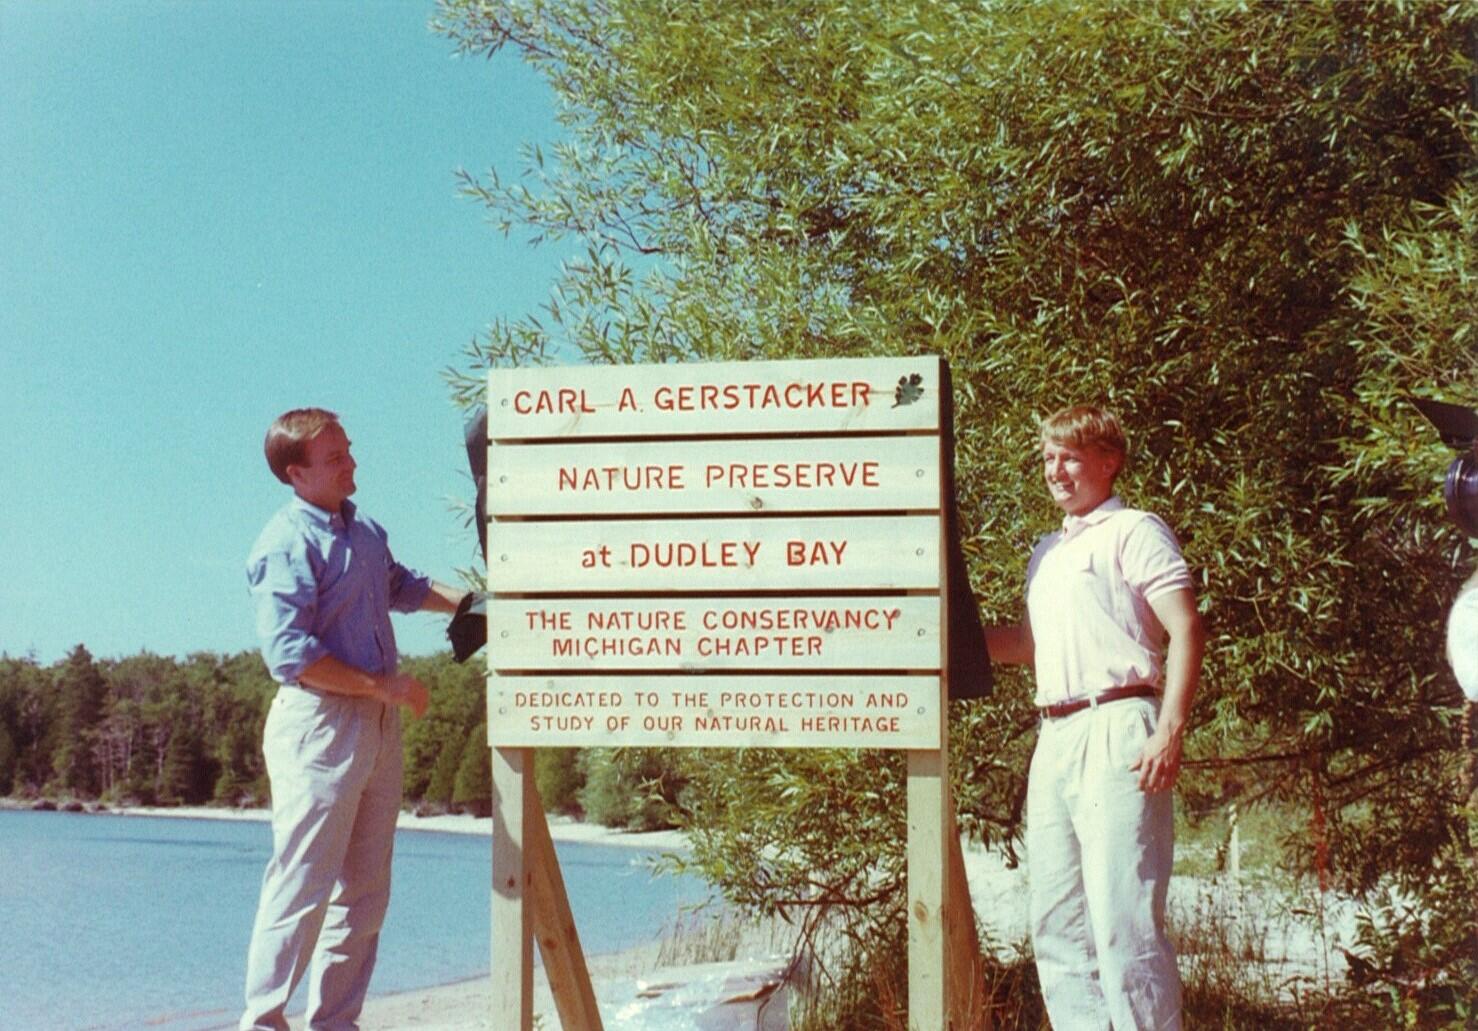 Two people stand next to a wooden preserve sign.